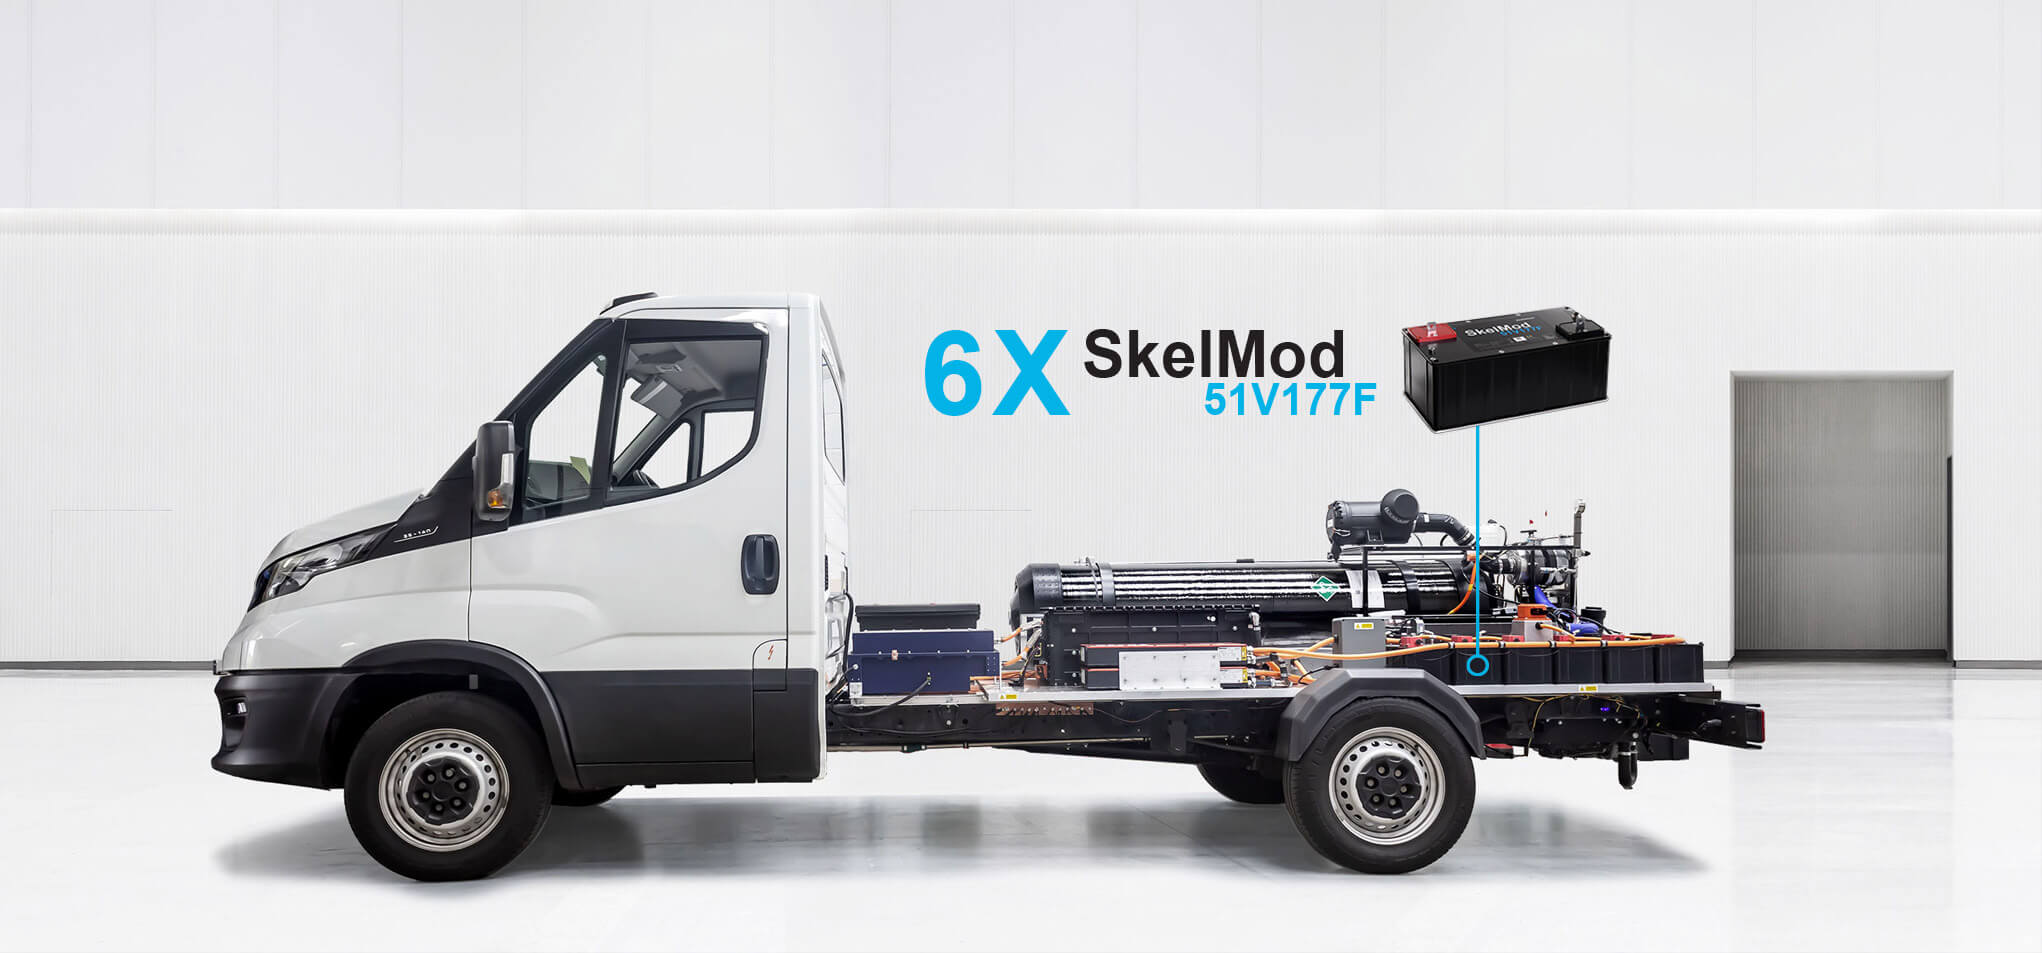 Hydrogen fuel cell van powered by Skeleton supercapacitors